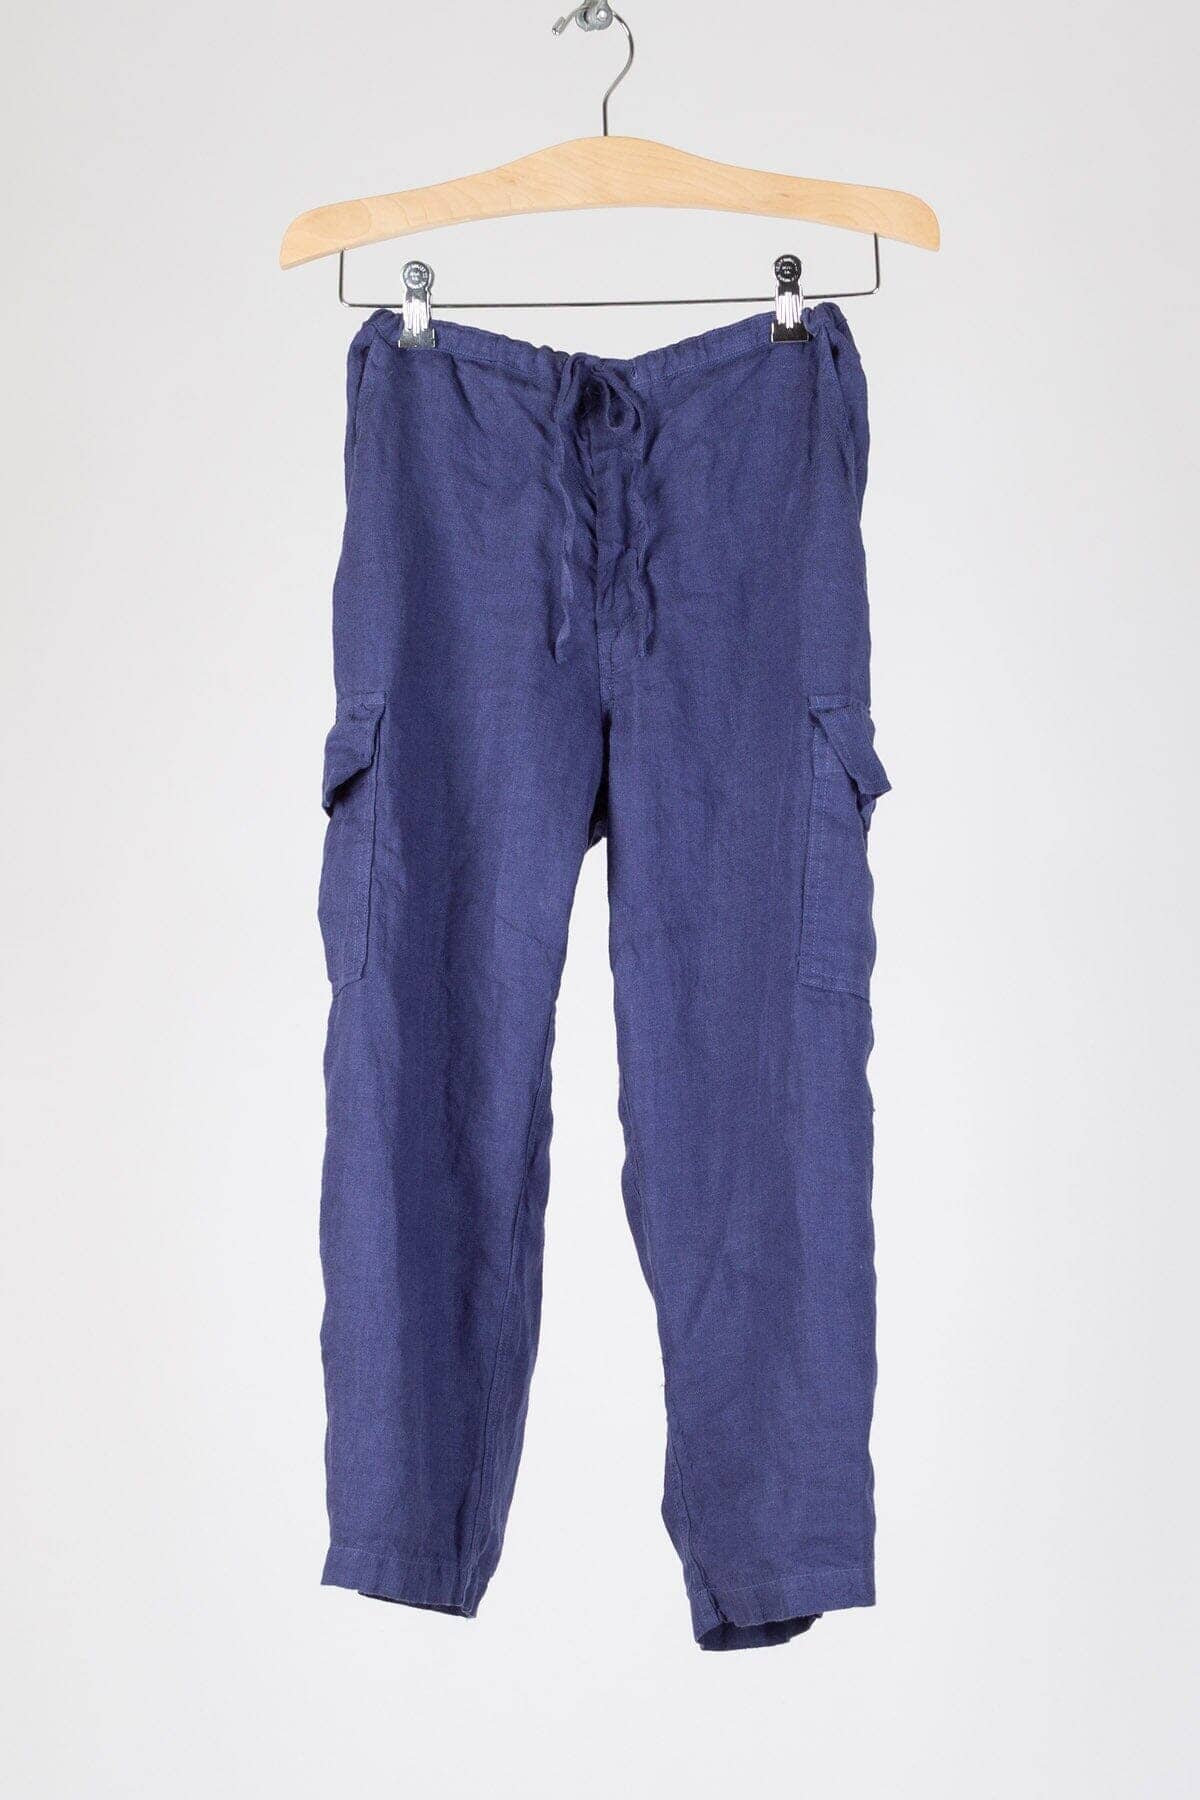 Cropped Cargo - Linen Twill Sale S21 - 893 Bottoms CP Shades marine 893